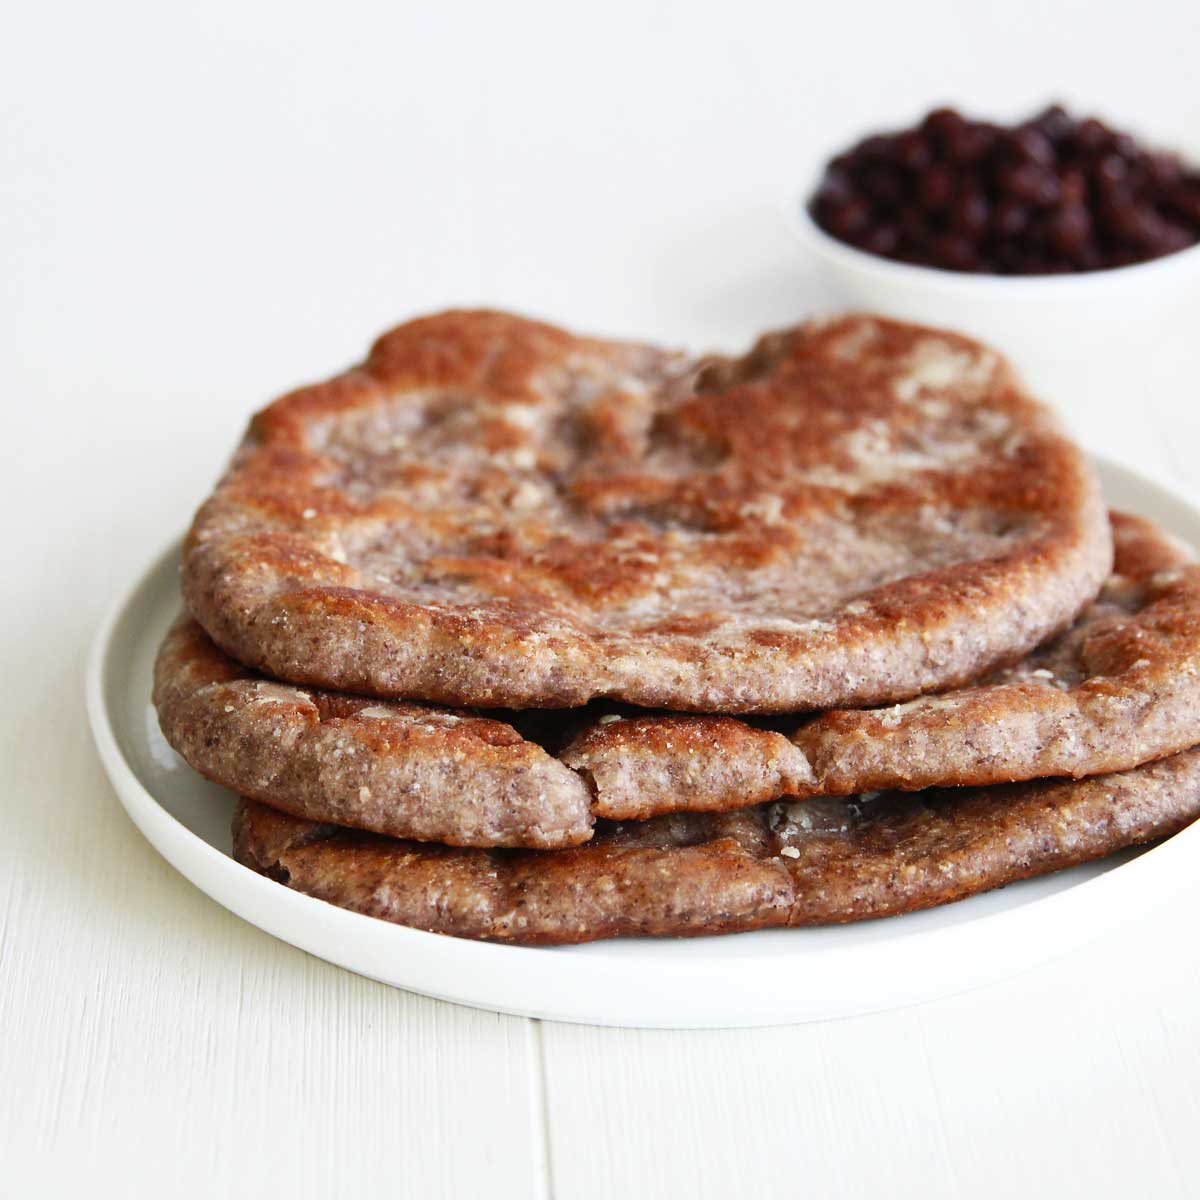 Black Bean Naan (Lower Carb Flatbread Made with Canned Black Beans) - Lentil Flatbread